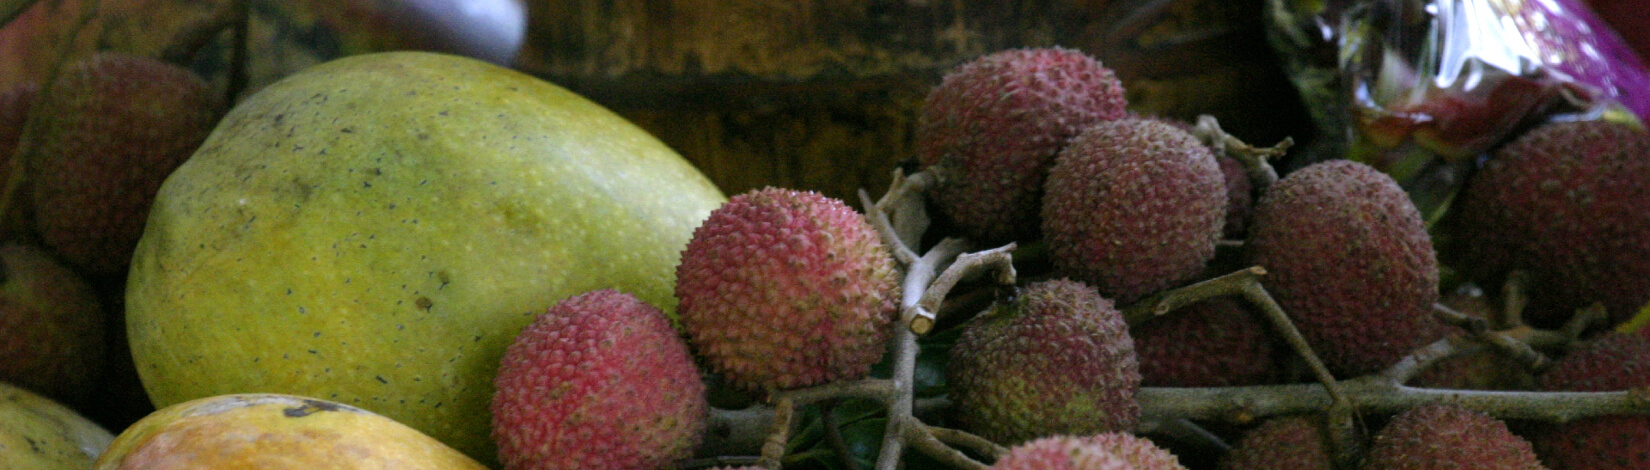 close up of tropical fruit on Tropical Fruit Day 